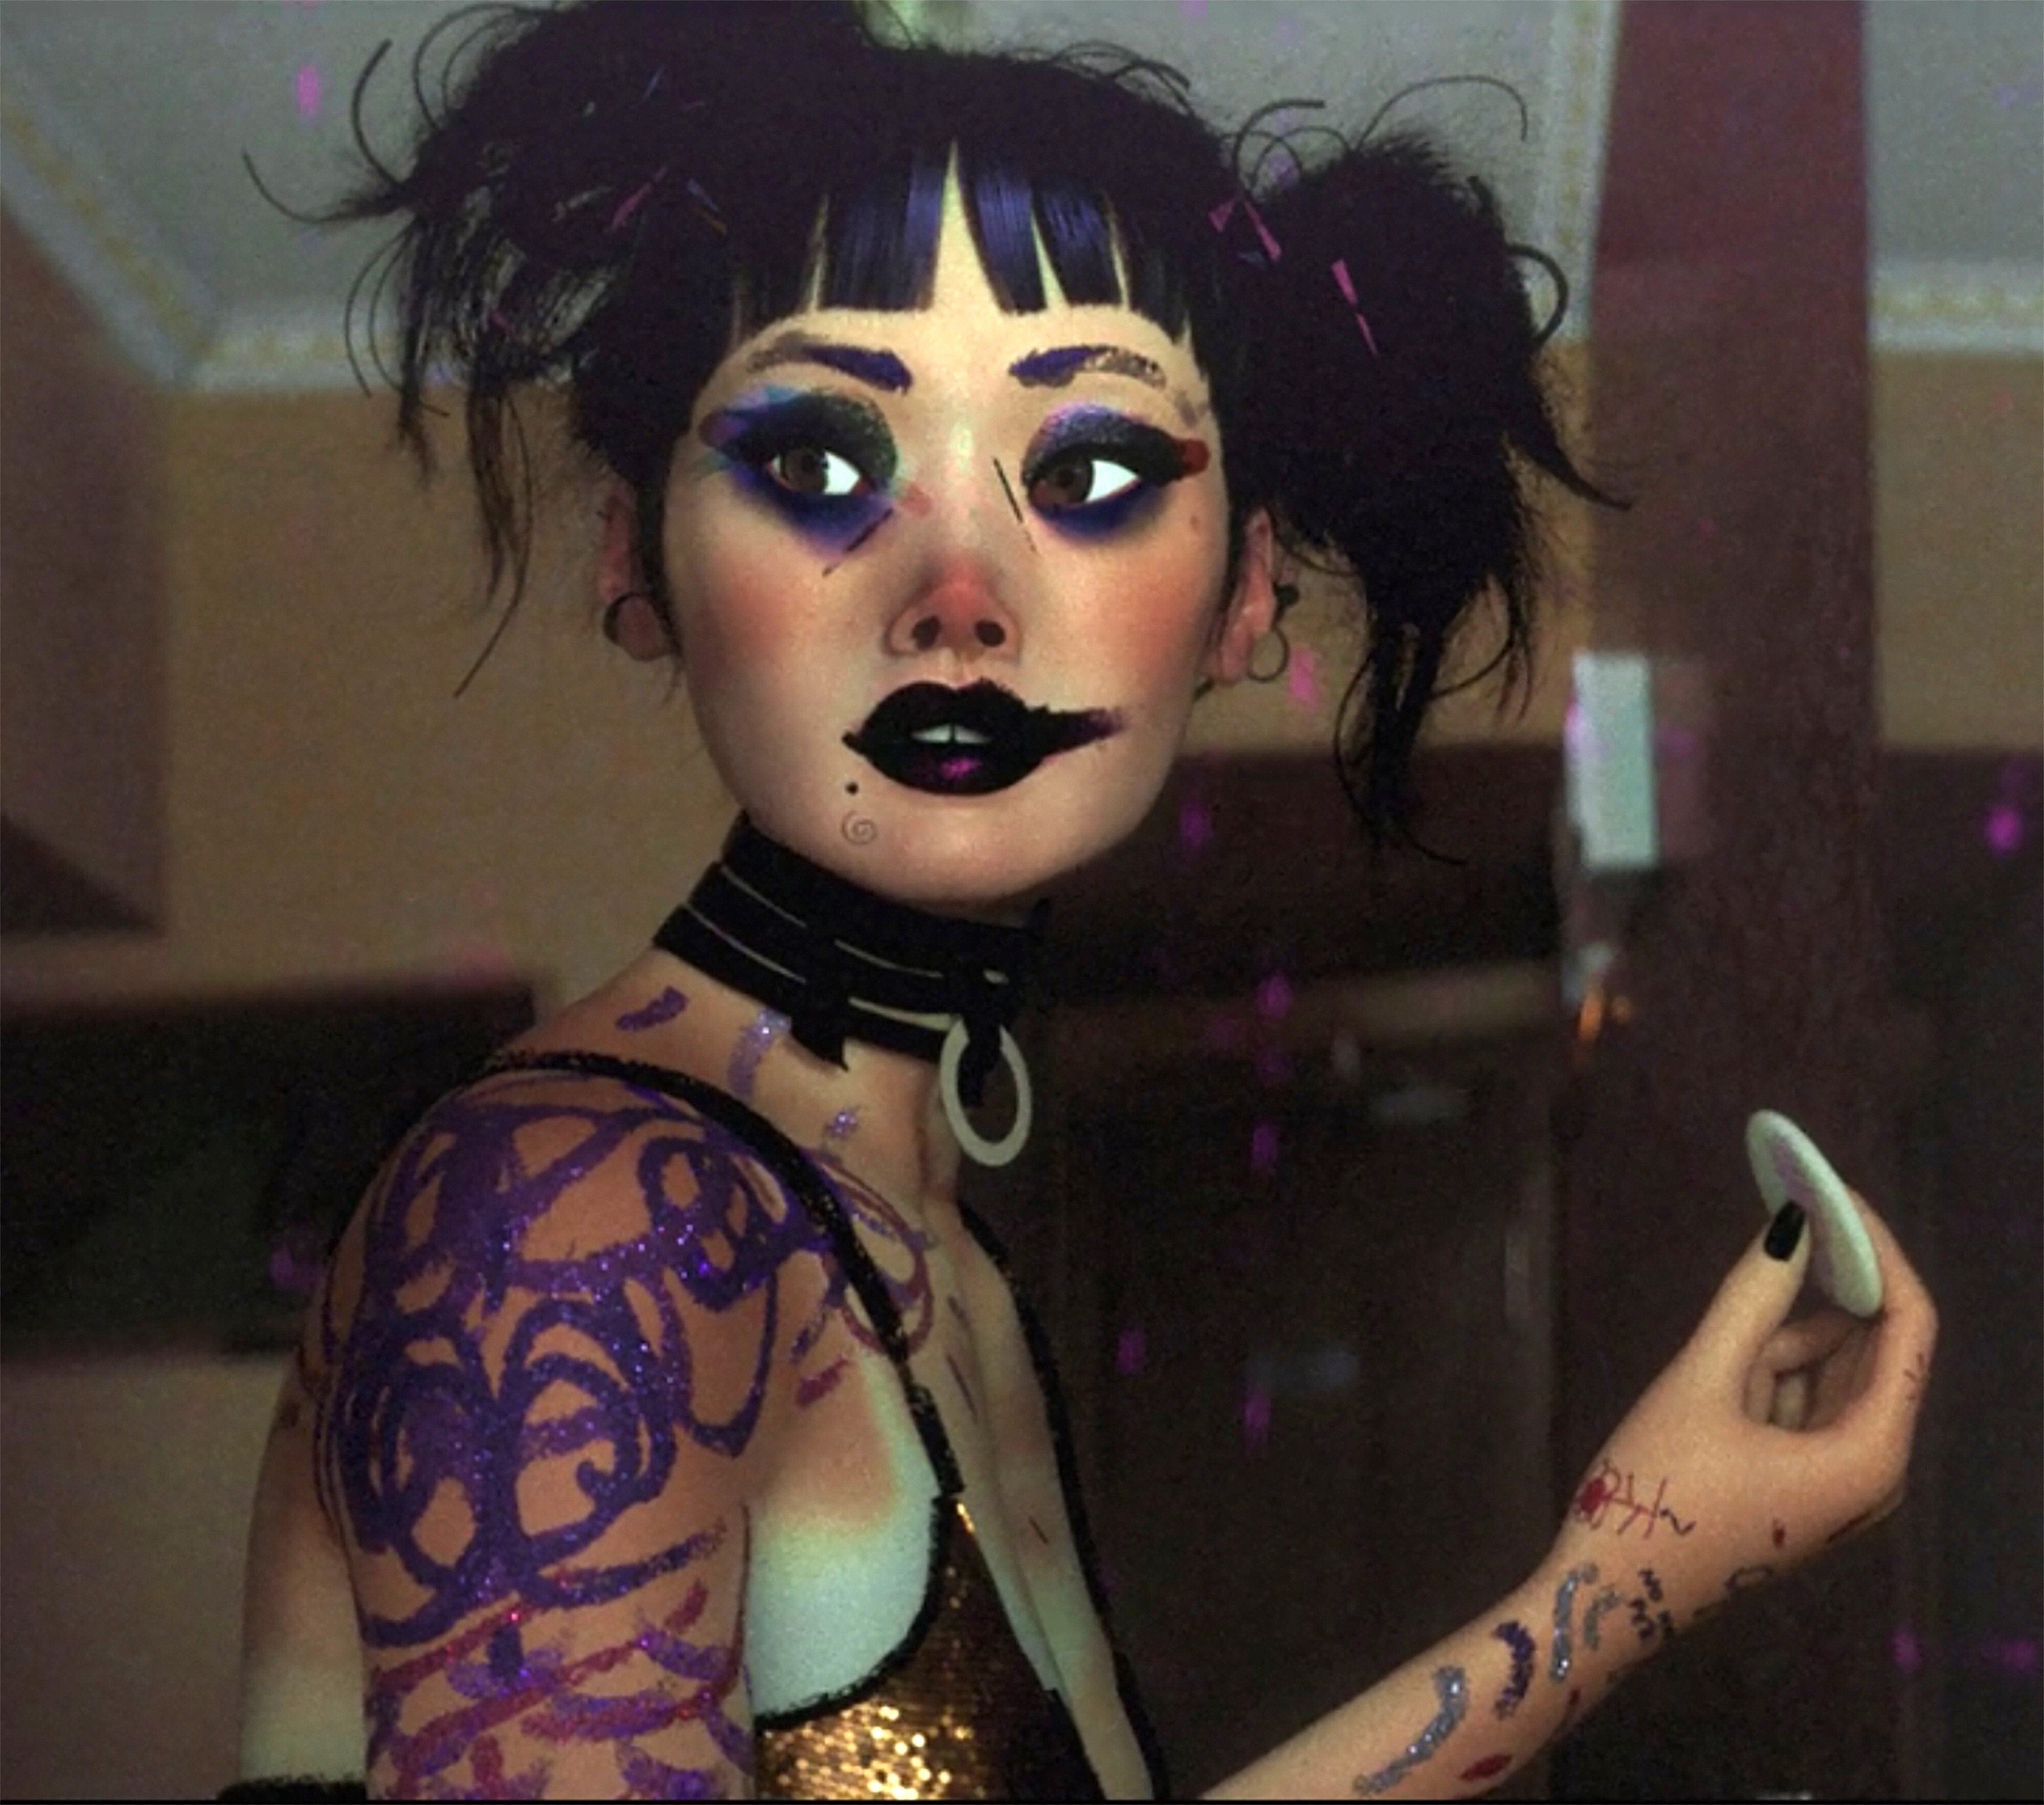 The animated star of The Witness, from Netflix’s Love, Death & Robots series, who sees a crime happening across the street from her flat and is then chased through an alternate version of Hong Kong.